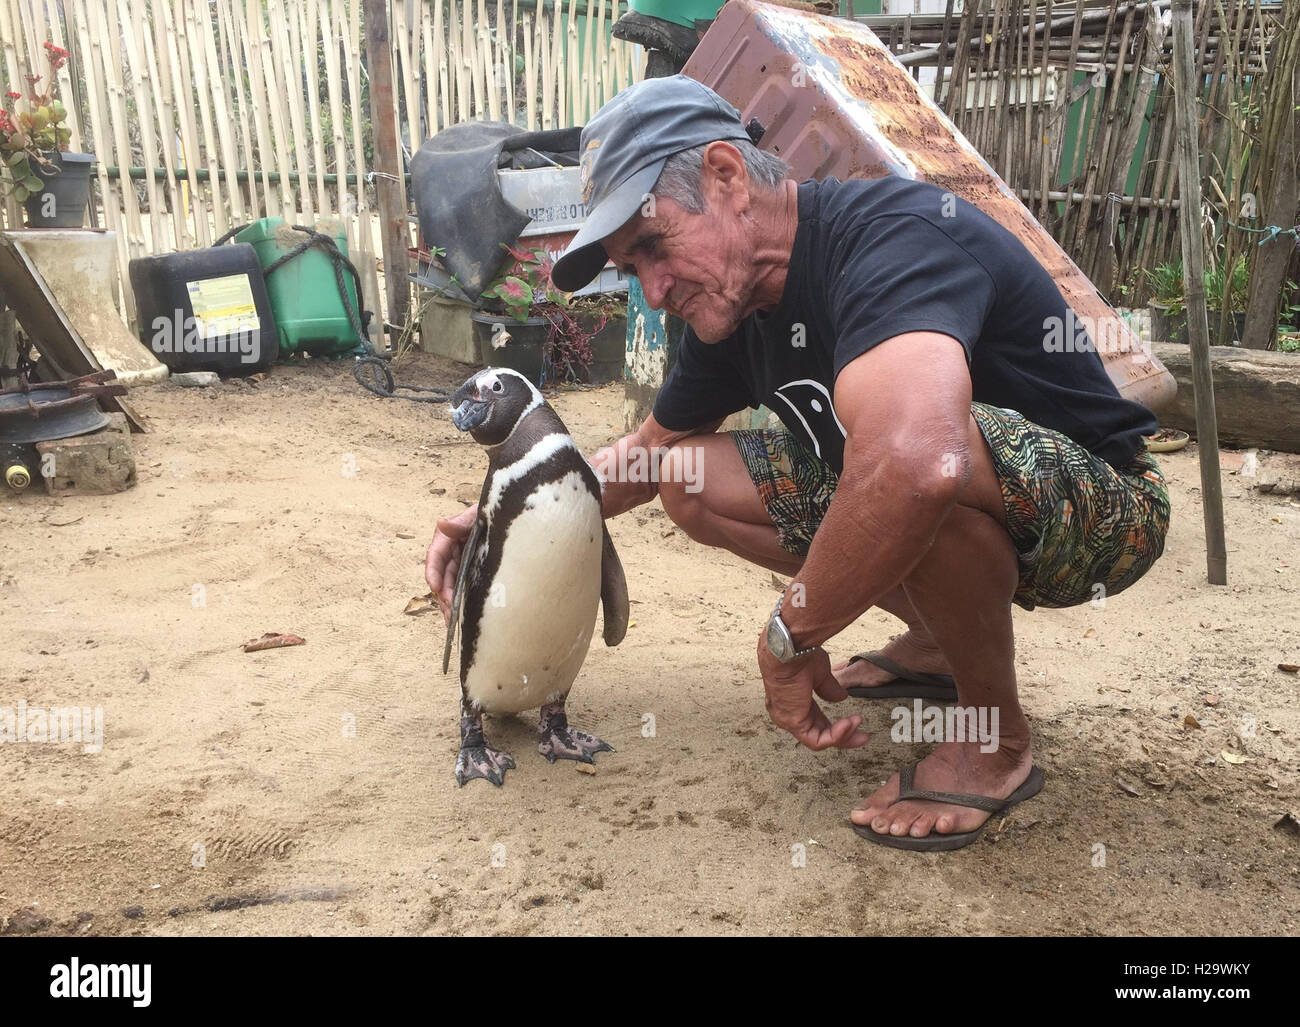 Penguin Dindim is petted by retired bricklayer Joao Pereira de Souza in the village of Proveta on the Atlantic island of Ilha Grande, Brazil, 5 September 2016. According to de Souza and other residents, the penguin swims several thousand kilometres from Patagonia to the Brazilian island every year to meet de Souza, who saved him from death in 2011. PHOTO: GEORG ISMAR/dpa - NO WIRE SERVICE - Stock Photo